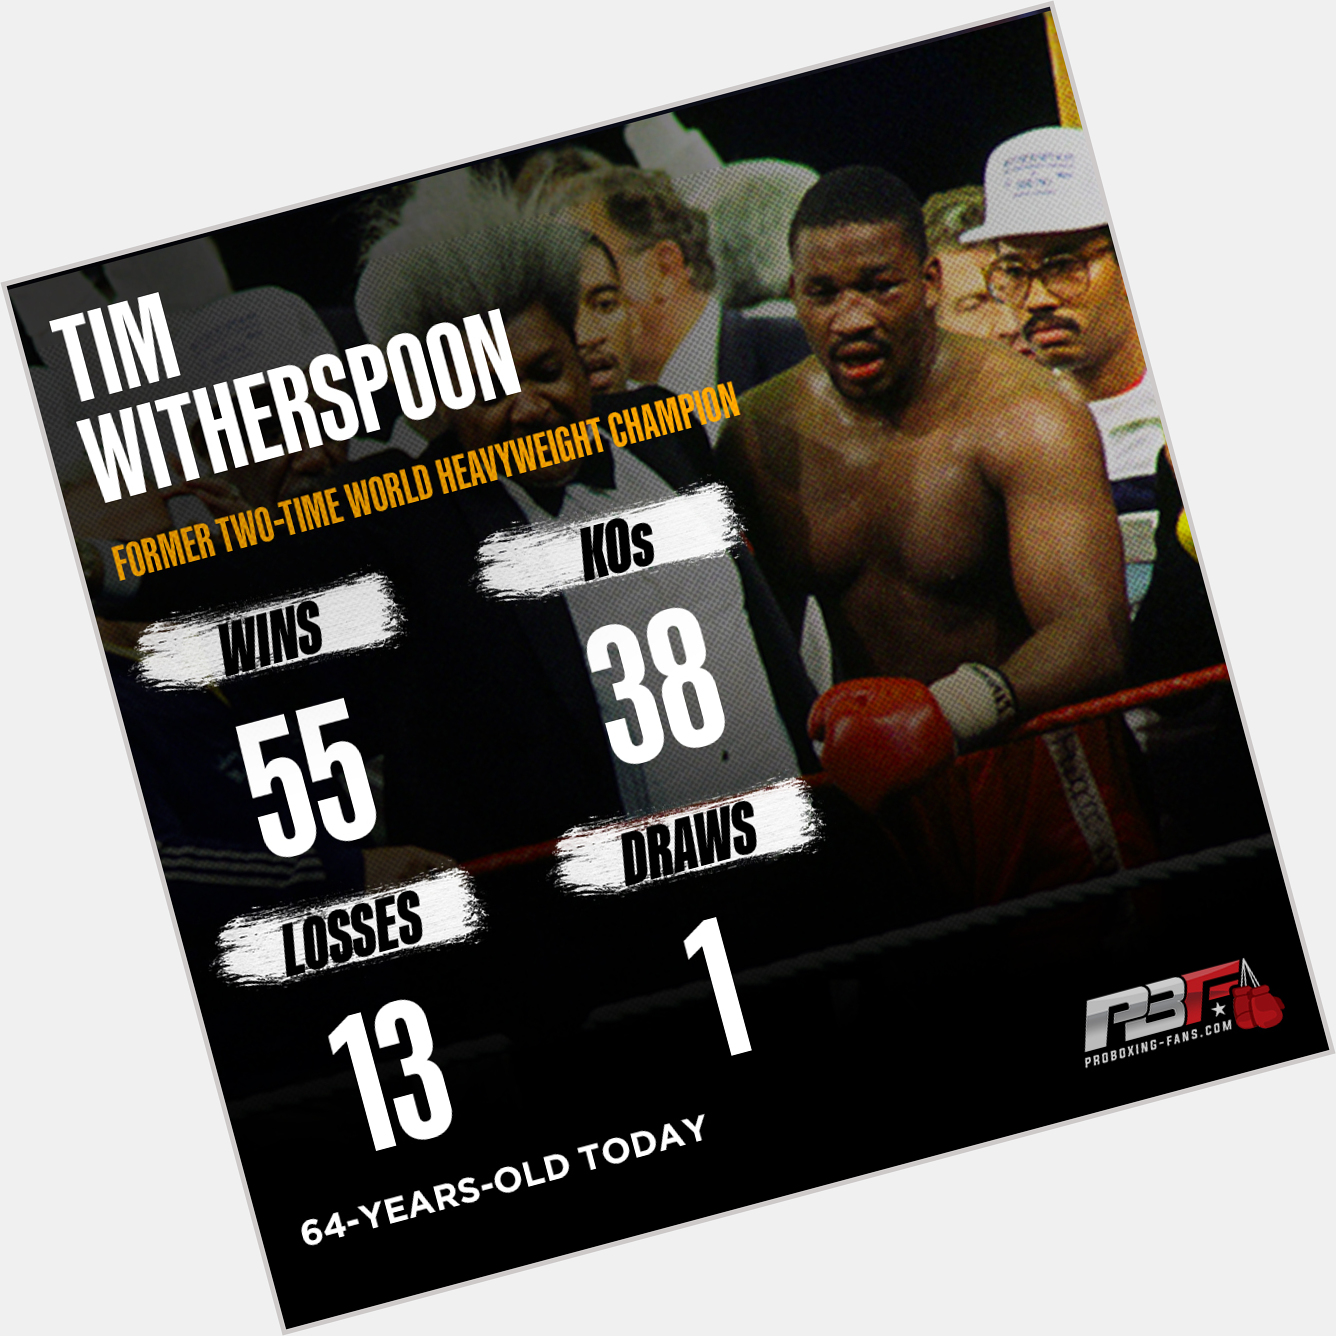  Happy Birthday, Tim Witherspoon    